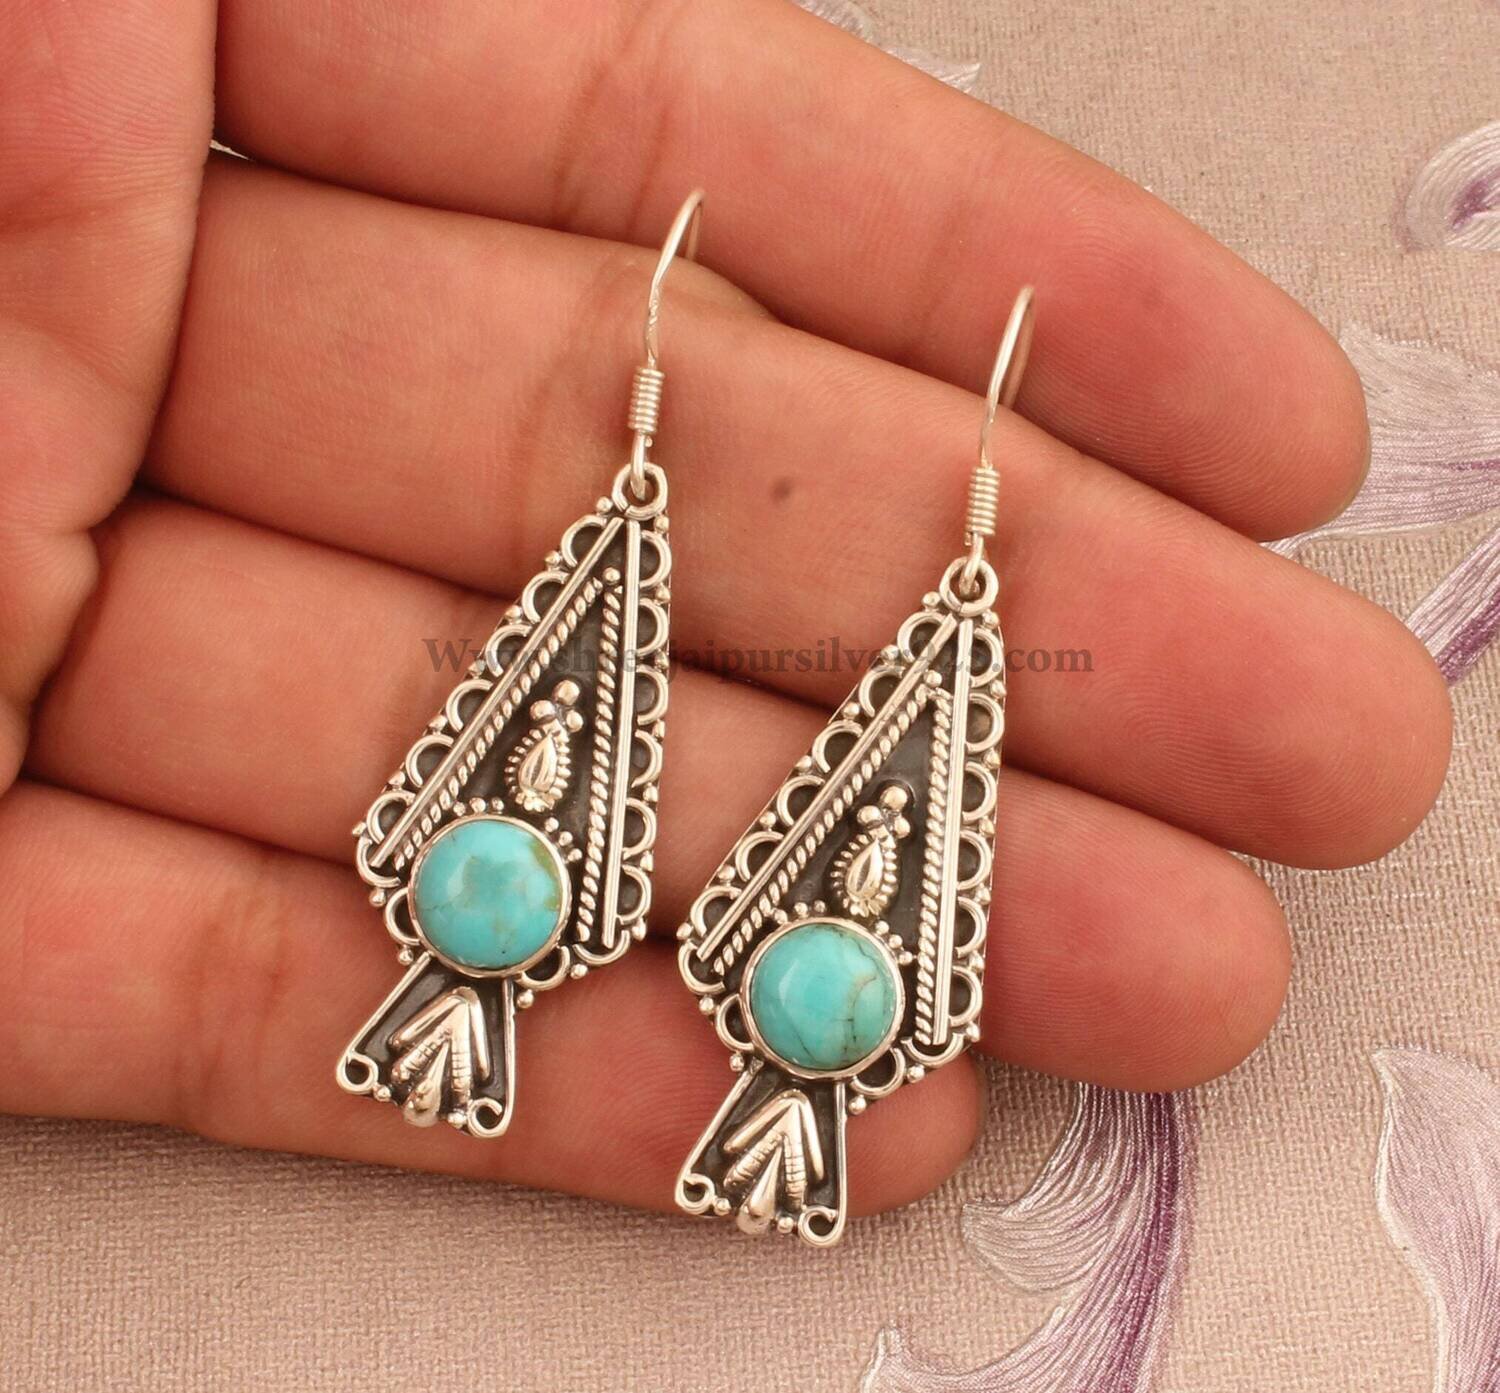 Tibetan Turquoise Solid 925 Sterling Silver Earrings For Women Handmade Round Stone Indian Design Earrings For Wedding Anniversary Gift Idea